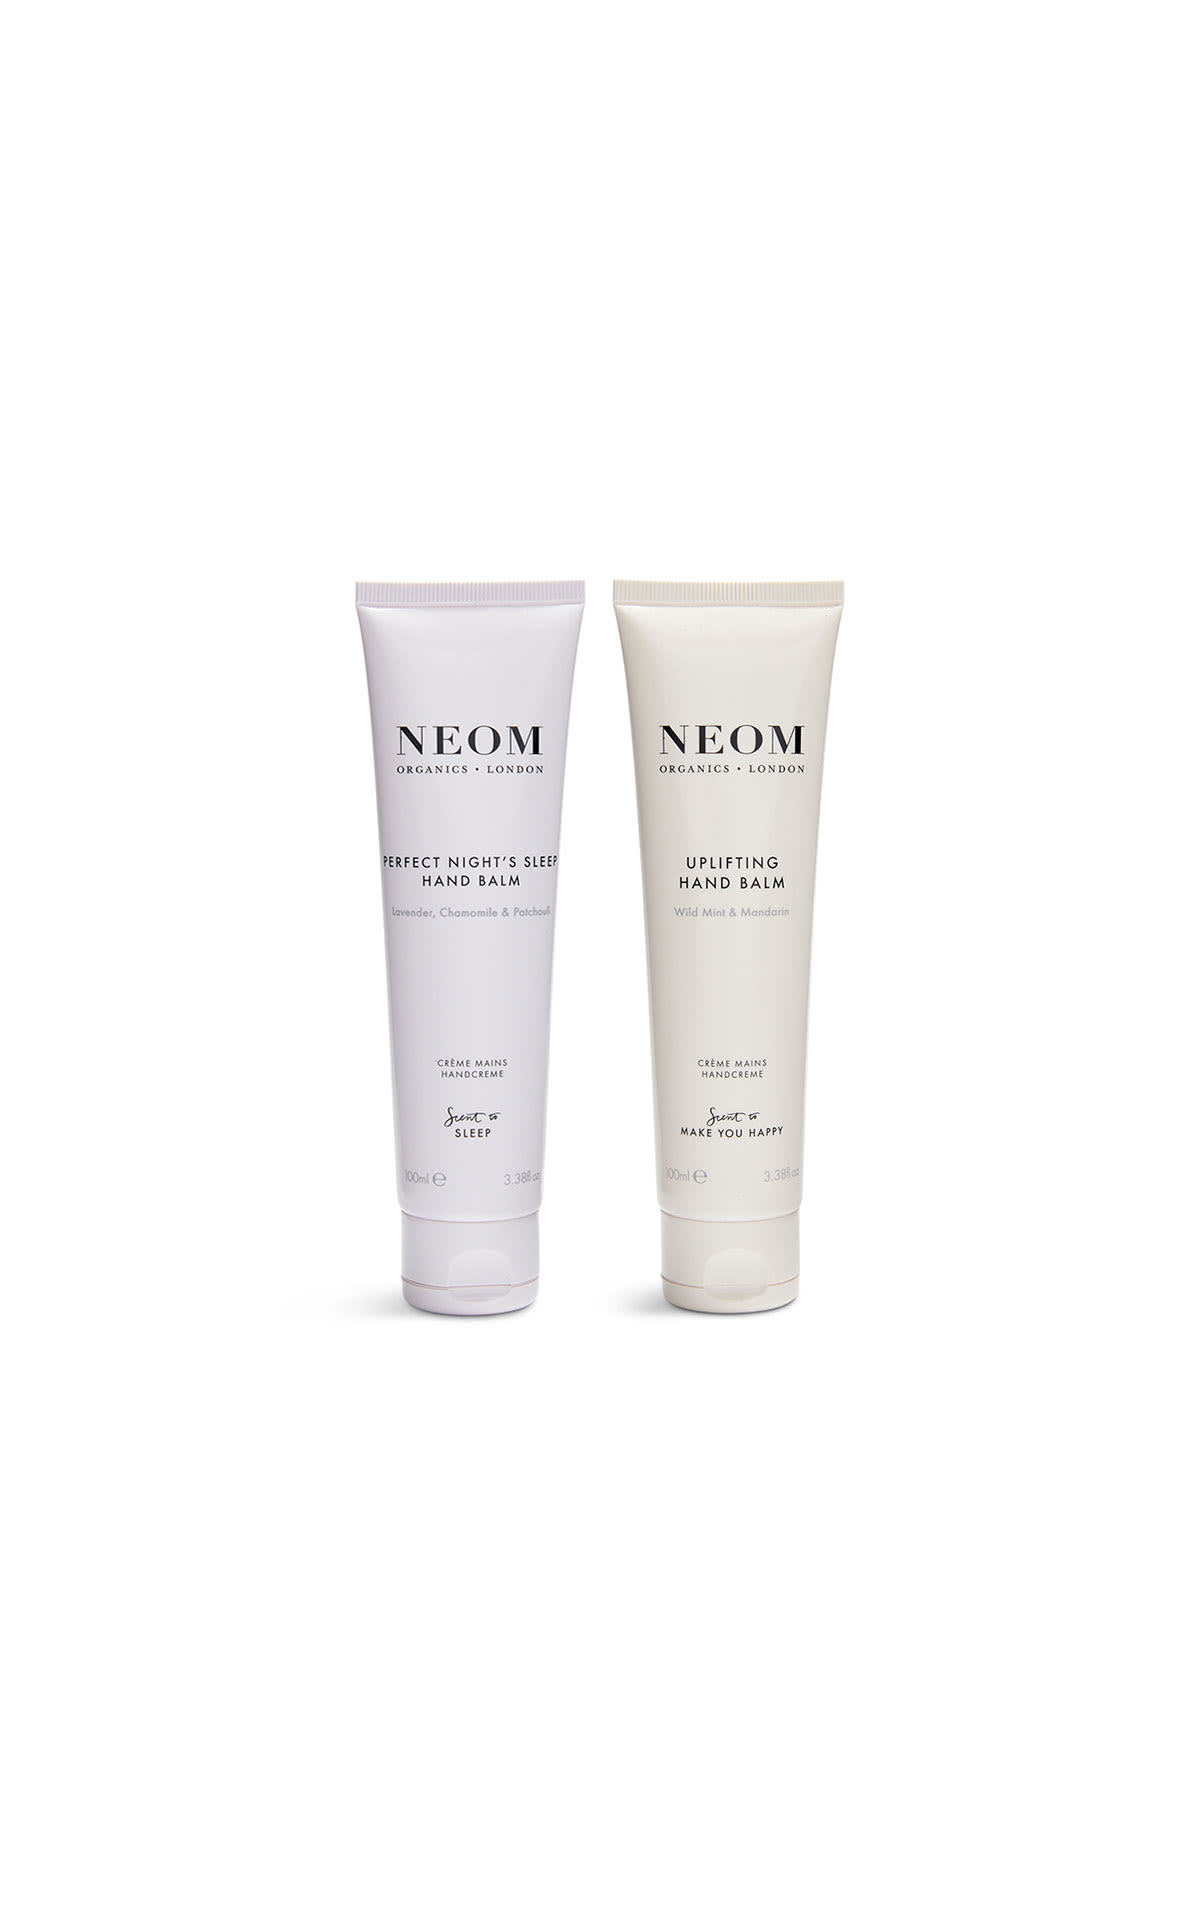 NEOM PNS and uplifting hand balm from Bicester Village